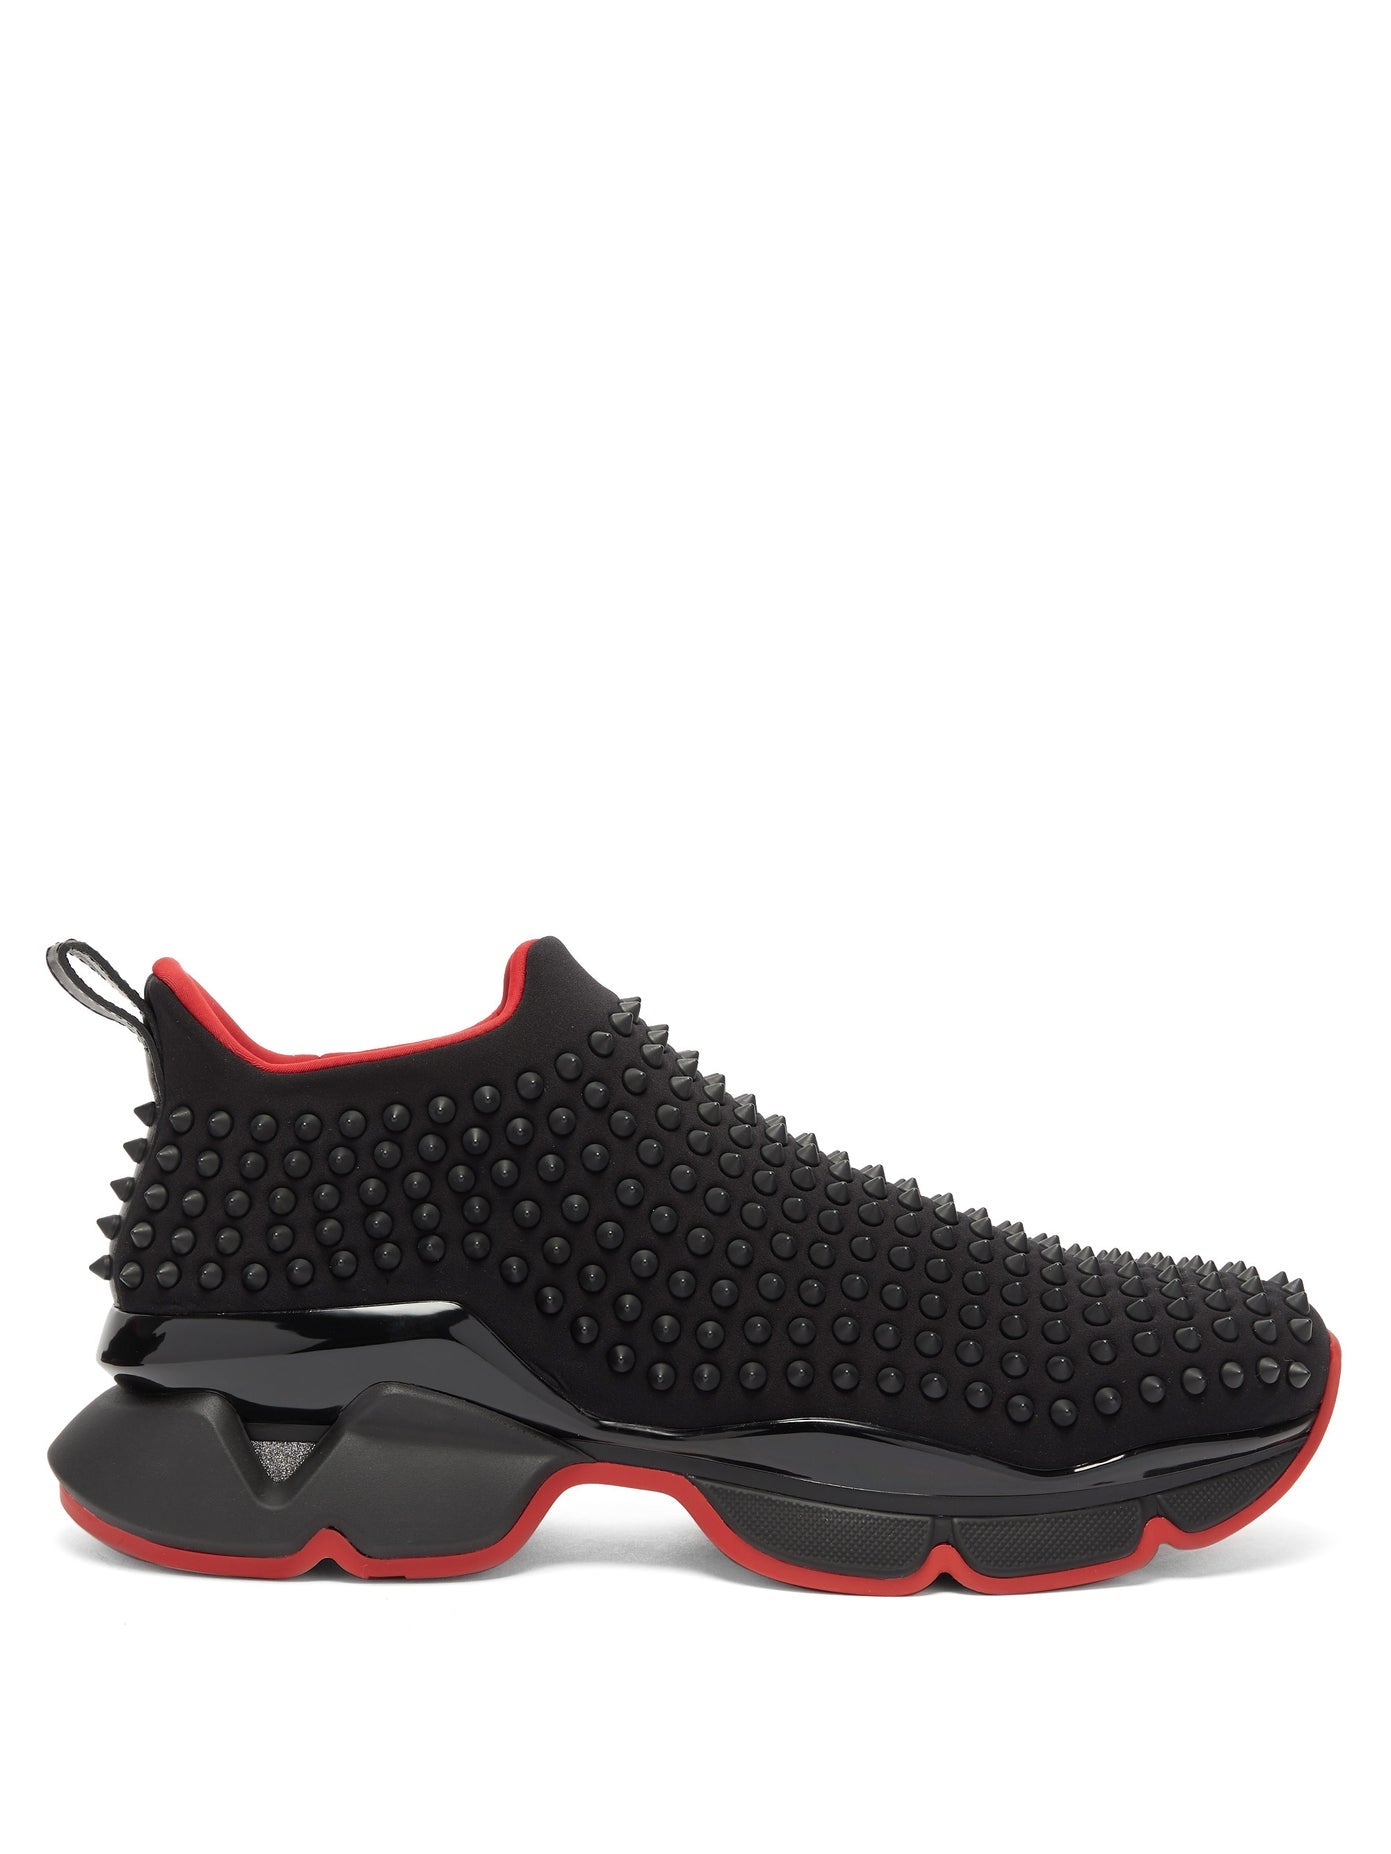 Christian Louboutin Authenticated Spike Sock Trainer